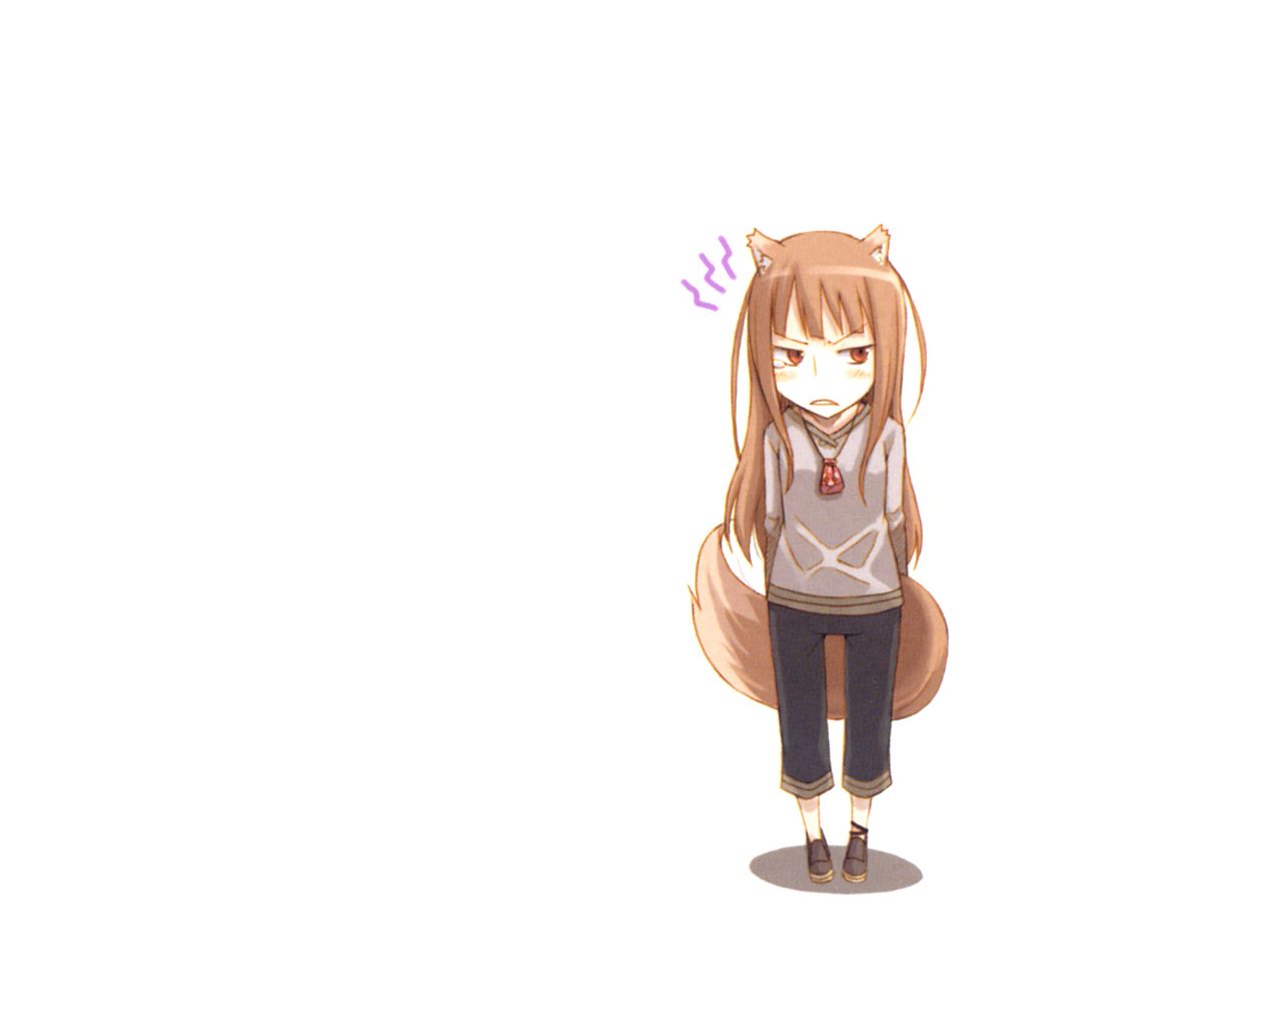 Anime Spice And Wolf 1280x1024